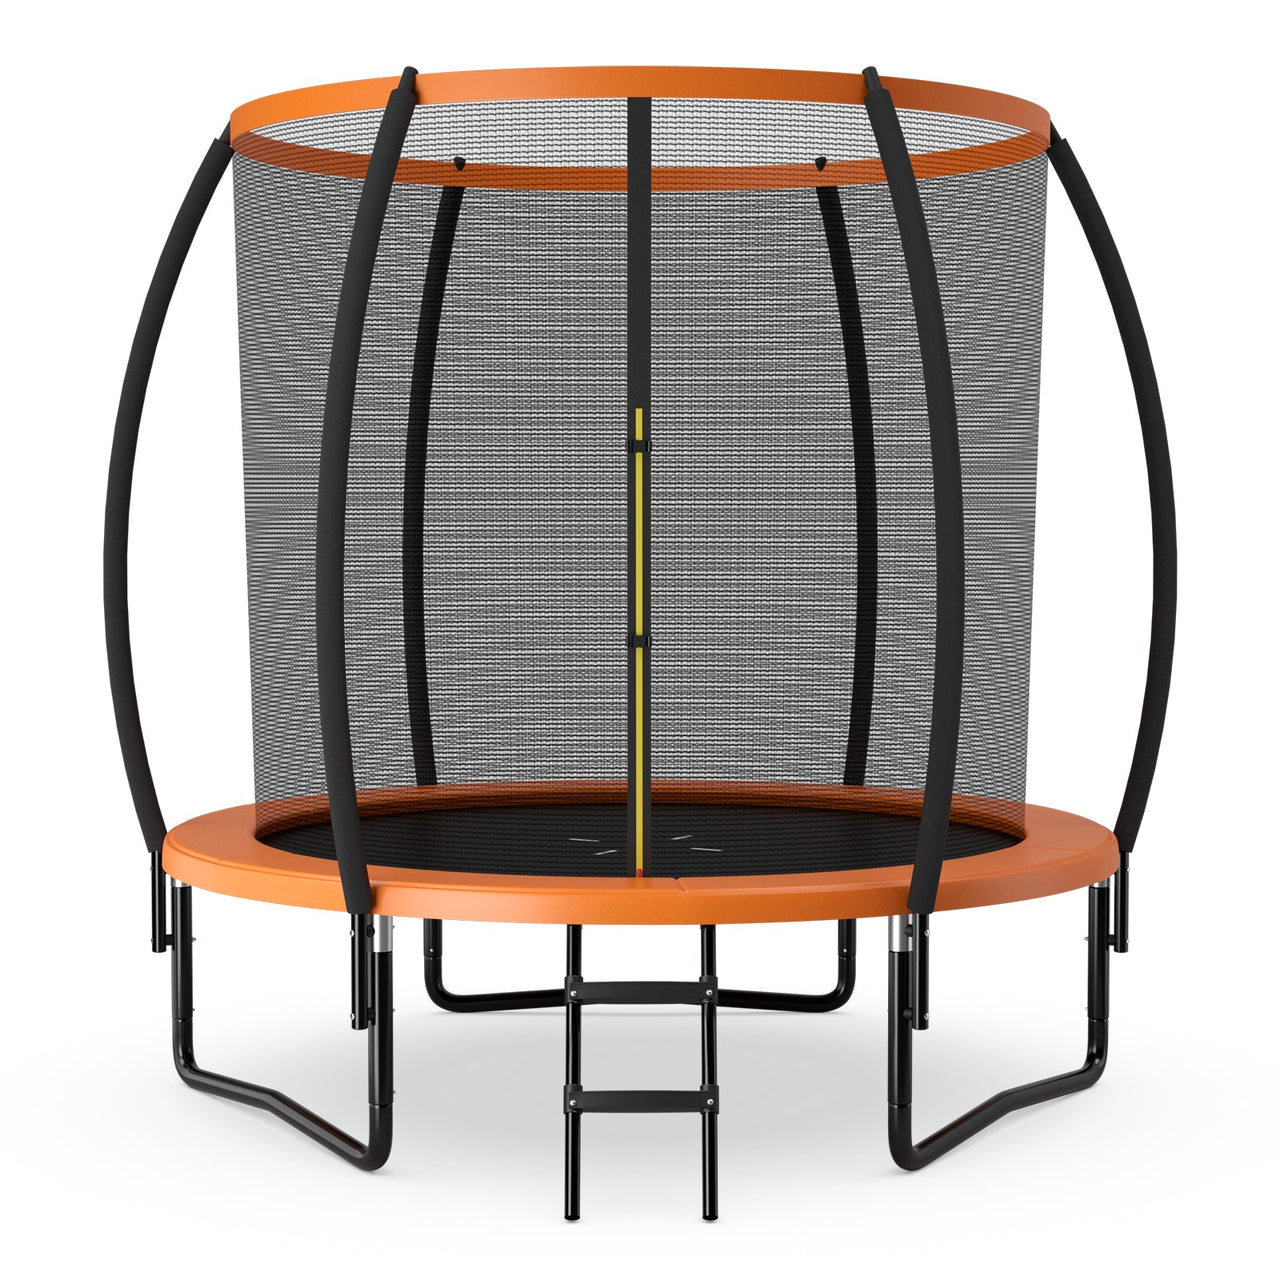 8 Feet ASTM Approved Recreational Trampoline with Ladder